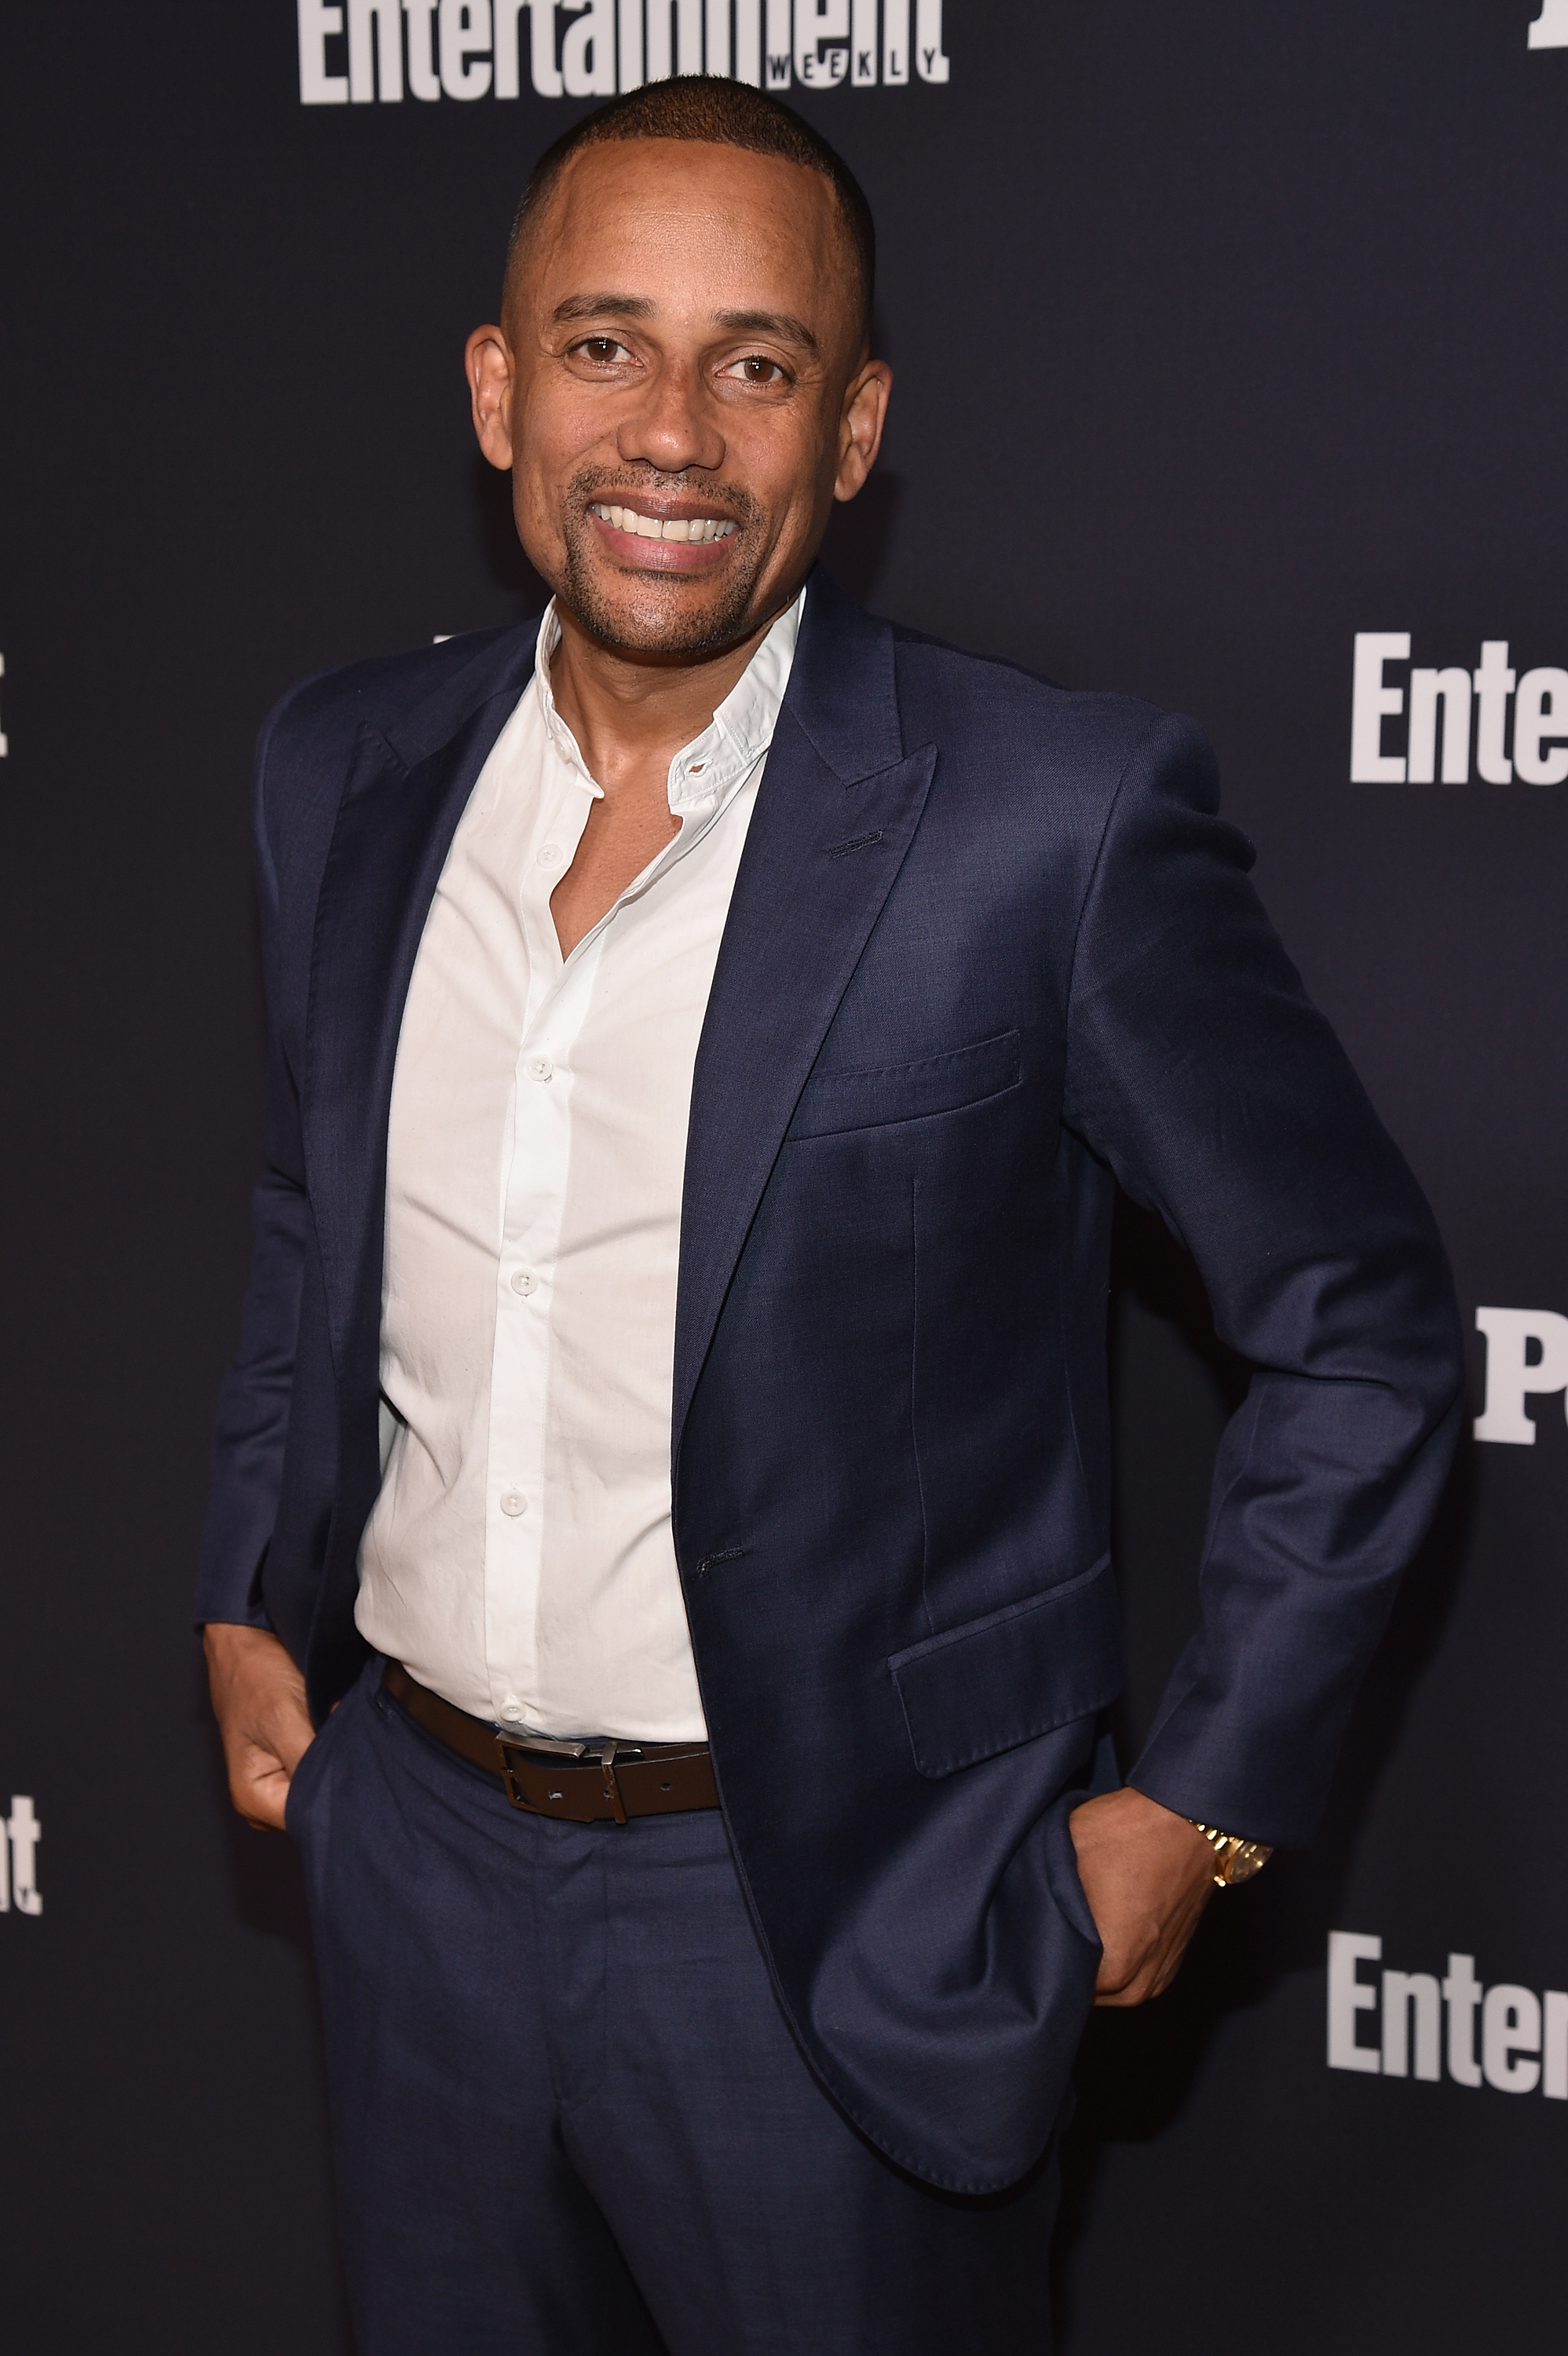 Entertainment Weekly And PEOPLE Upfronts Party At Second Floor In NYC Presented By Netflix And Terra Chips - Arrivals